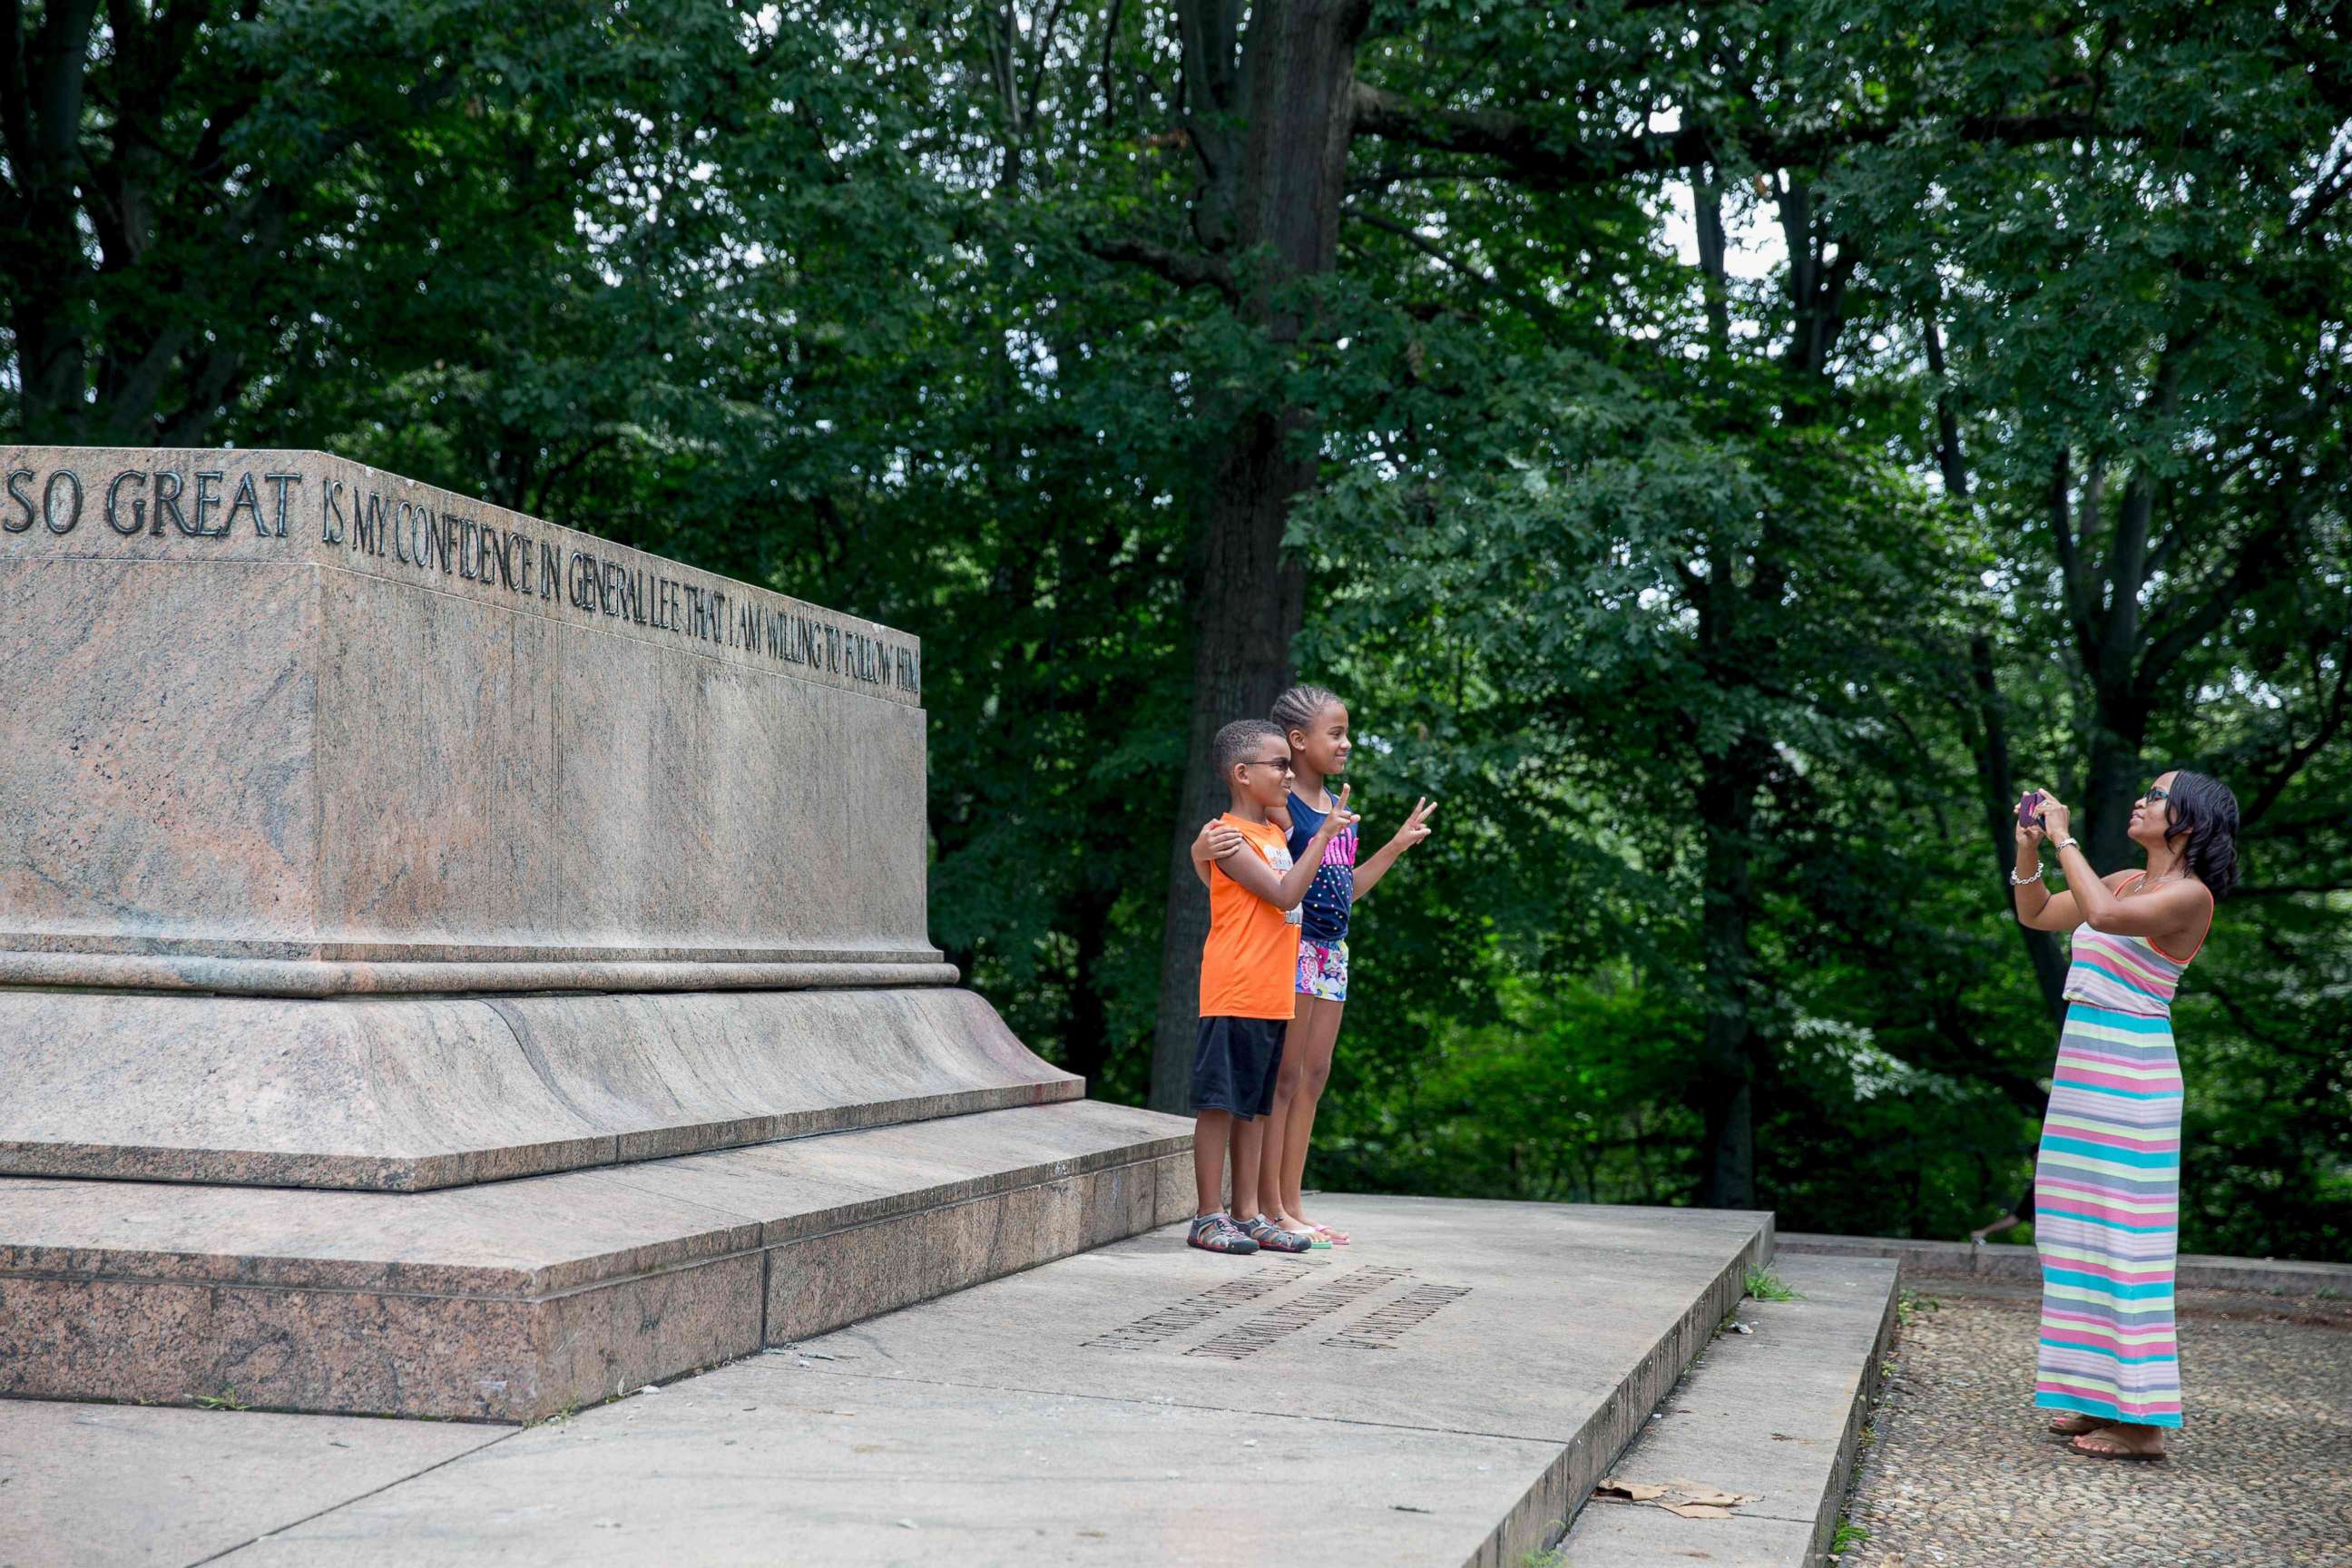 PHOTO: A family takes photos at the Robert E. Lee and Thomas J. "Stonewall" Jackson monument base in Wyman Park Dell in Baltimore after it was removed by the city on Aug. 16, 2017.